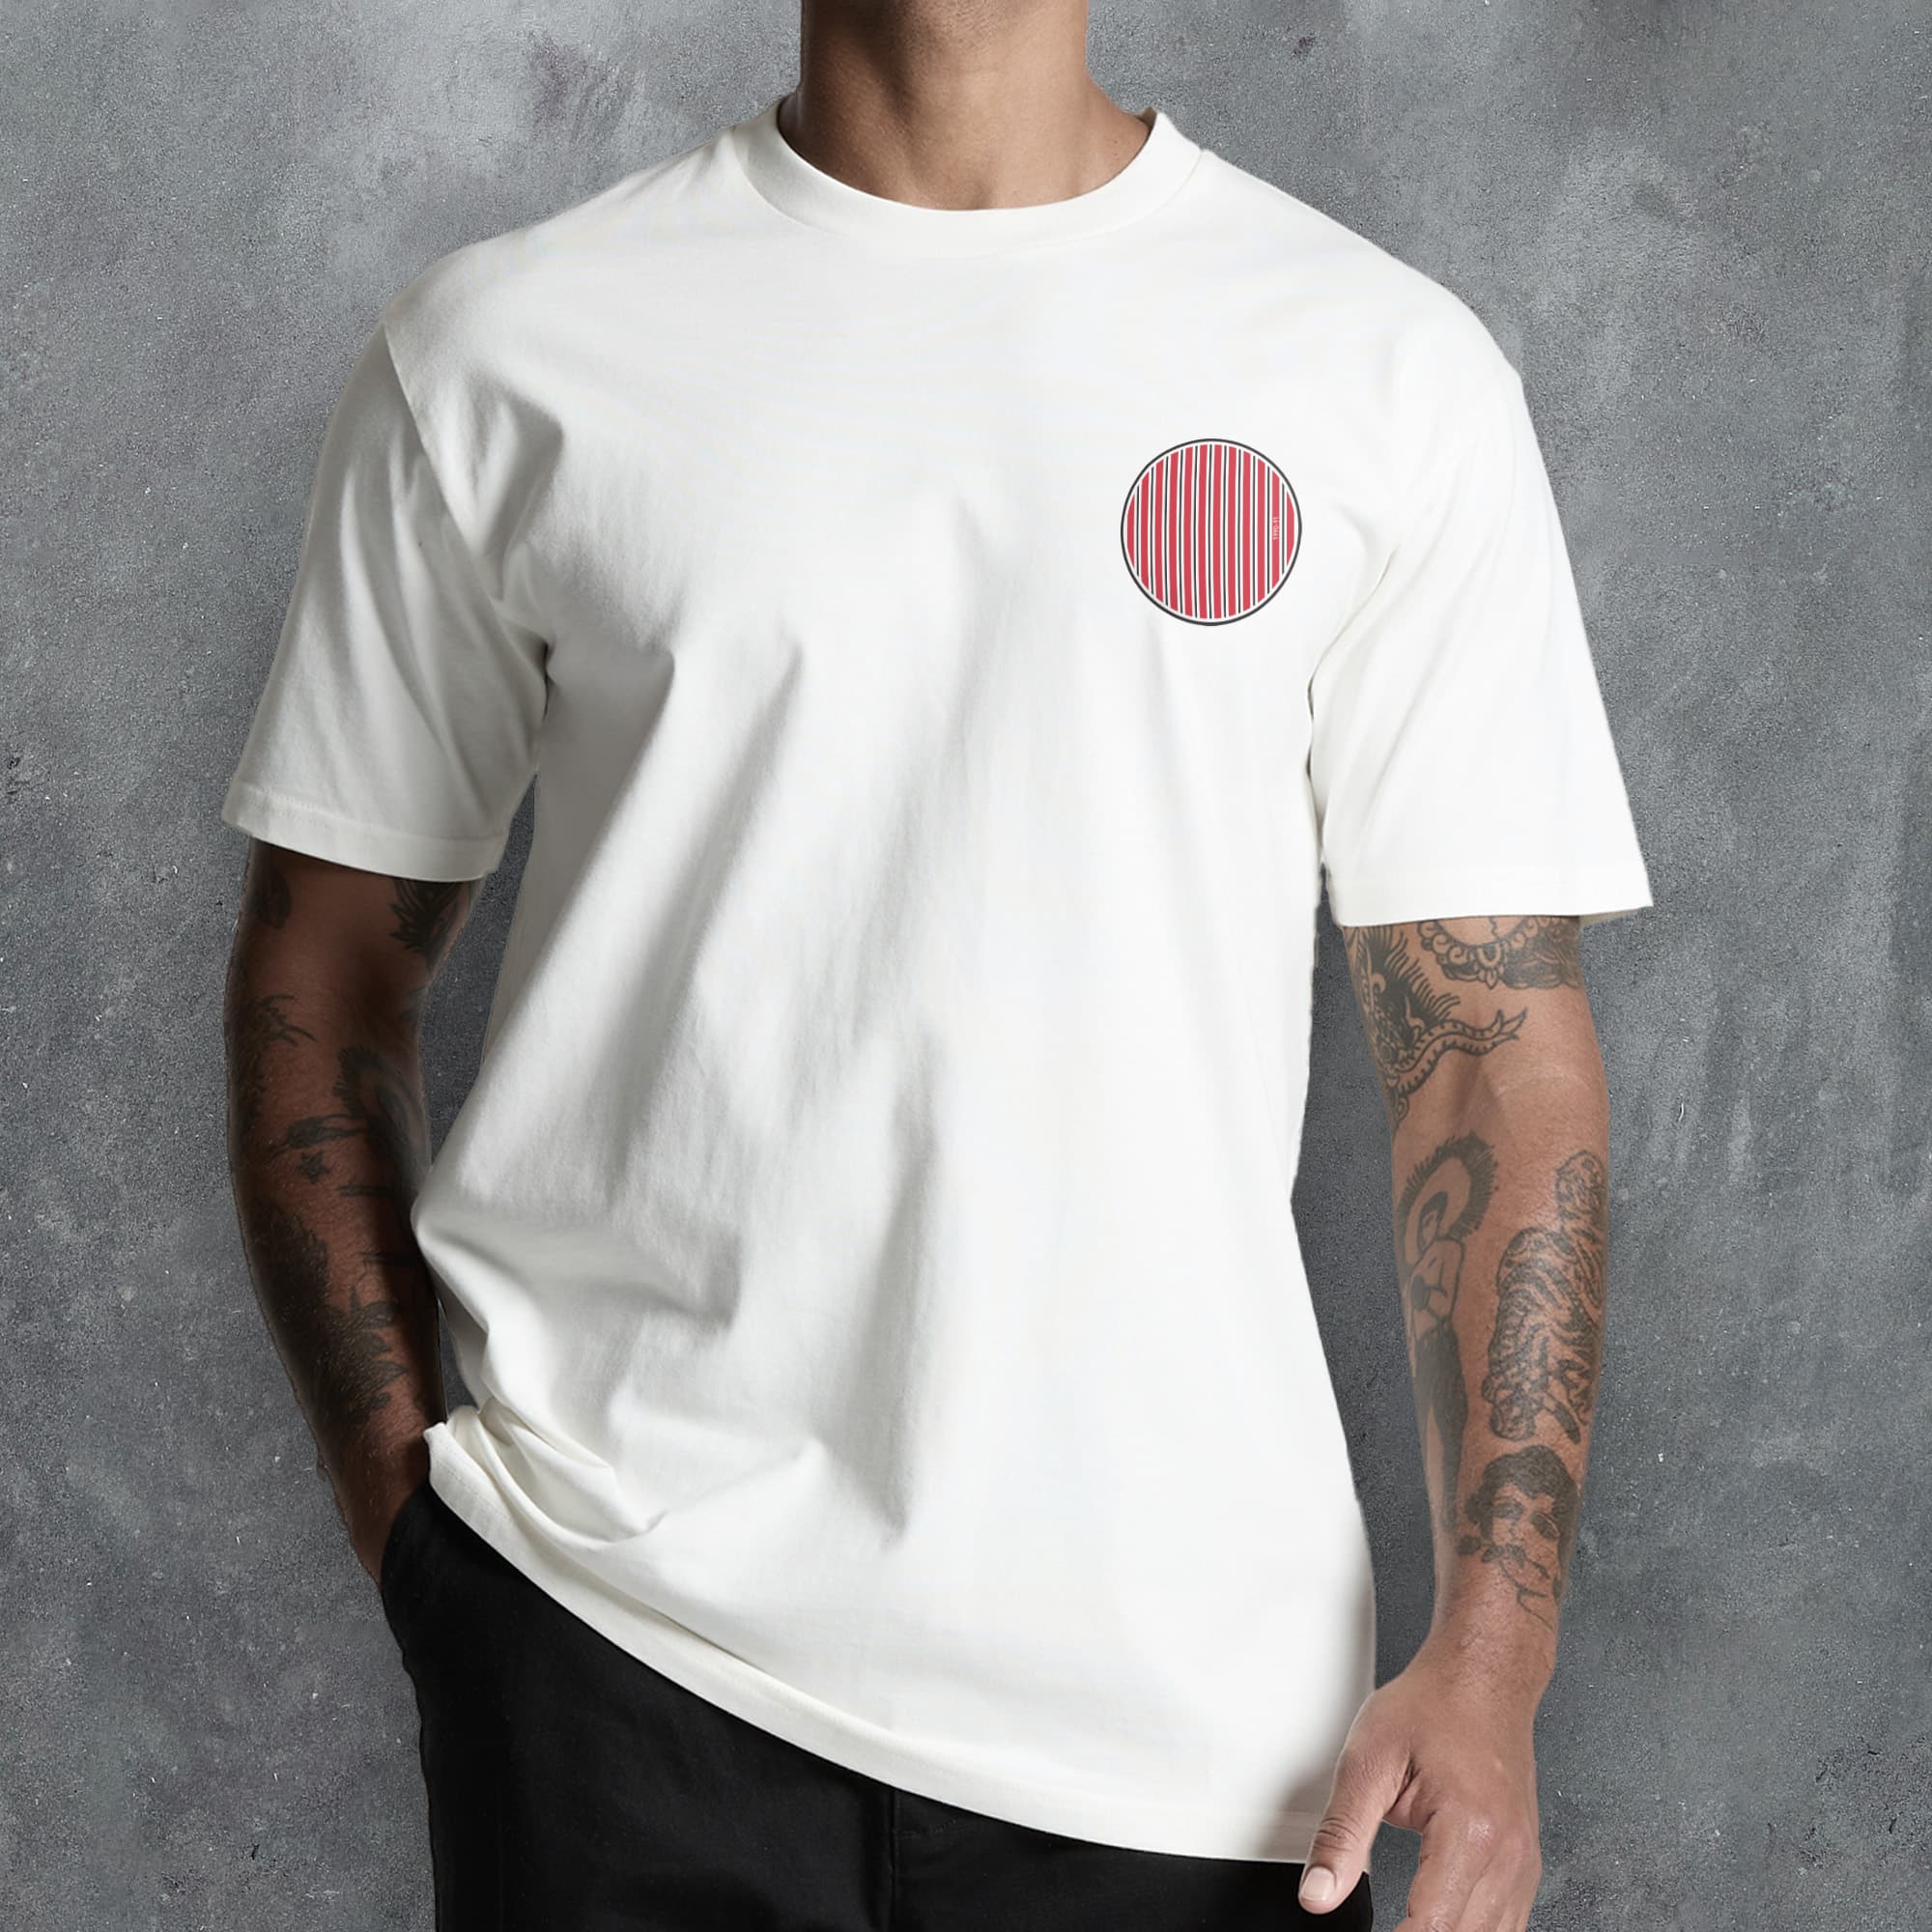 a man wearing a white t - shirt with a red circle on it